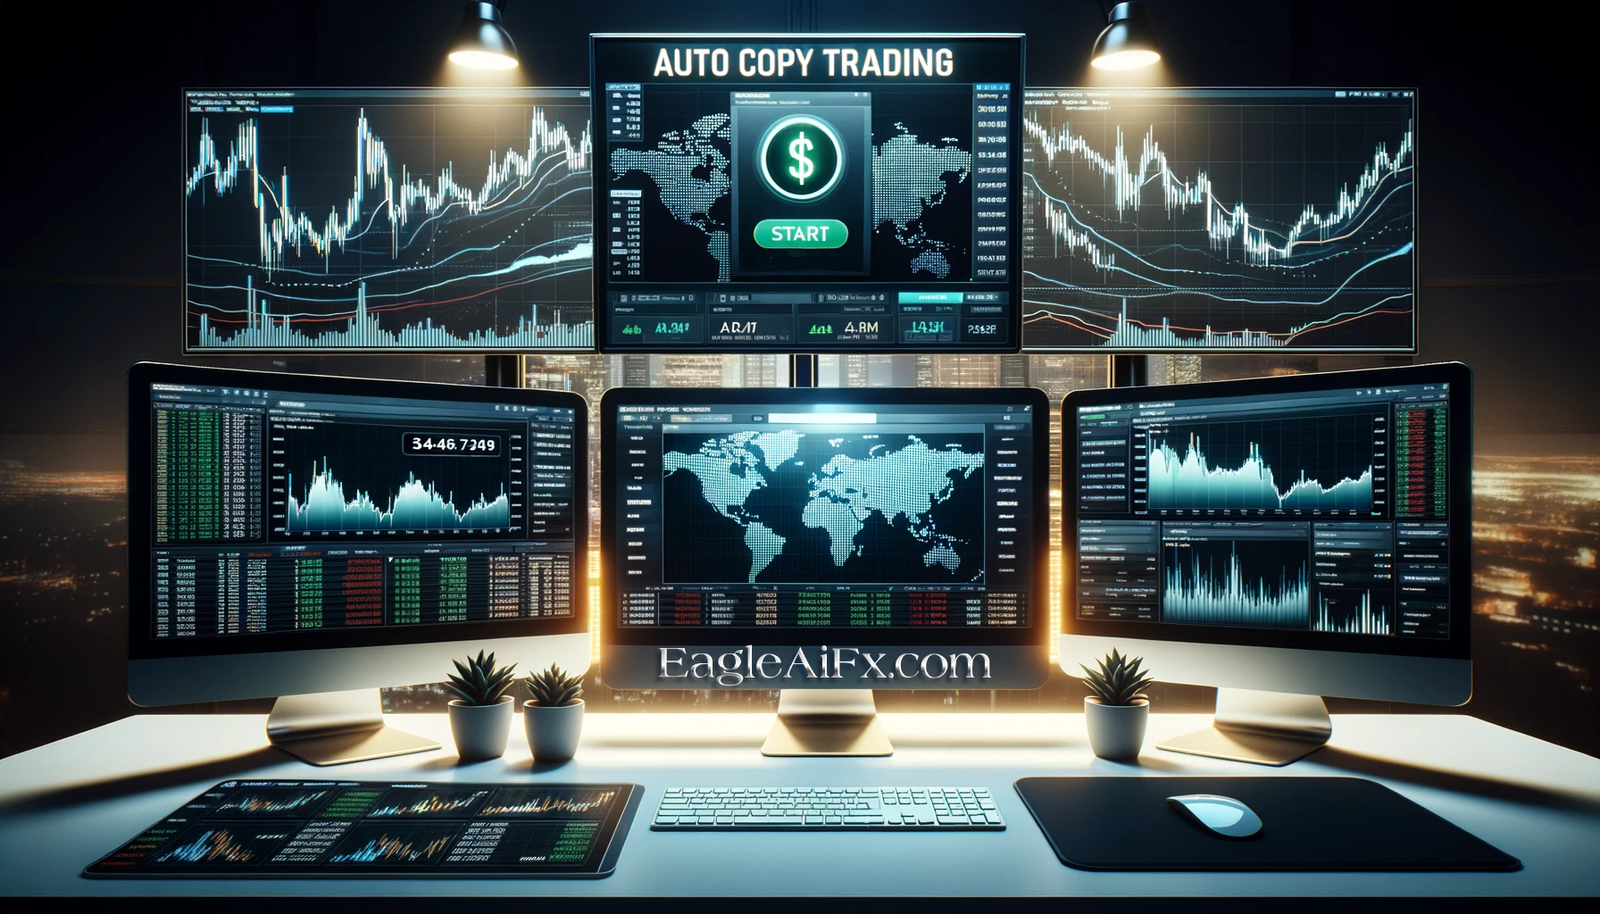 Top 10 Copy Trading Strategy : Step-by-Step Guide - eagleaifx.com